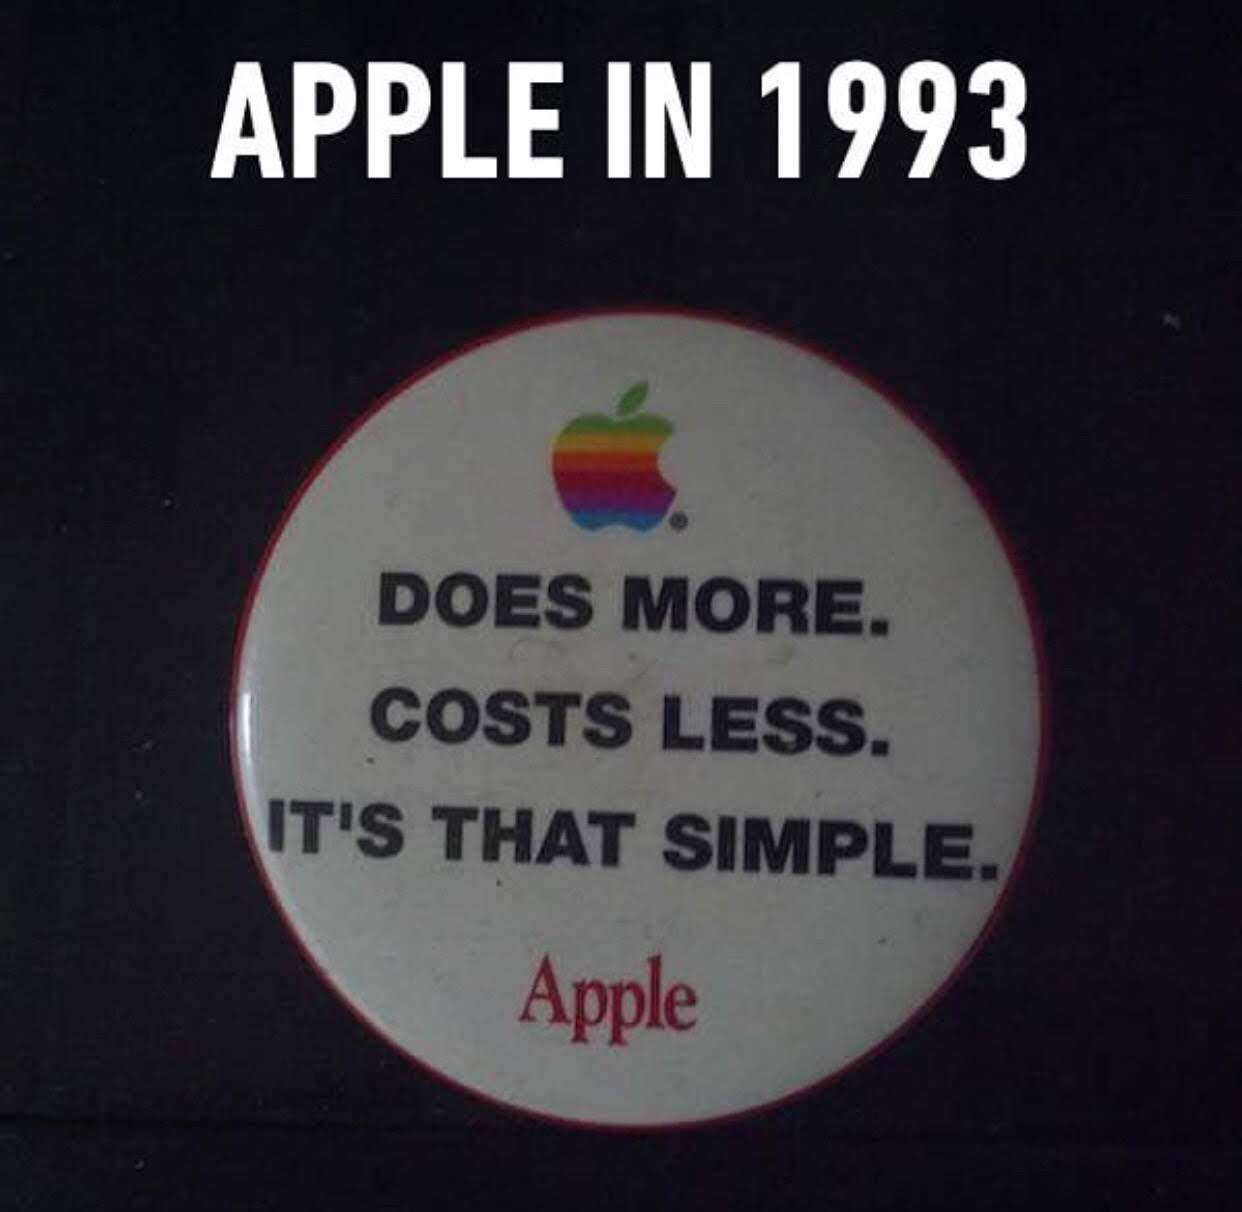 blockbuster llc - Apple In 1993 Does More. Costs Less. It'S That Simple. Apple